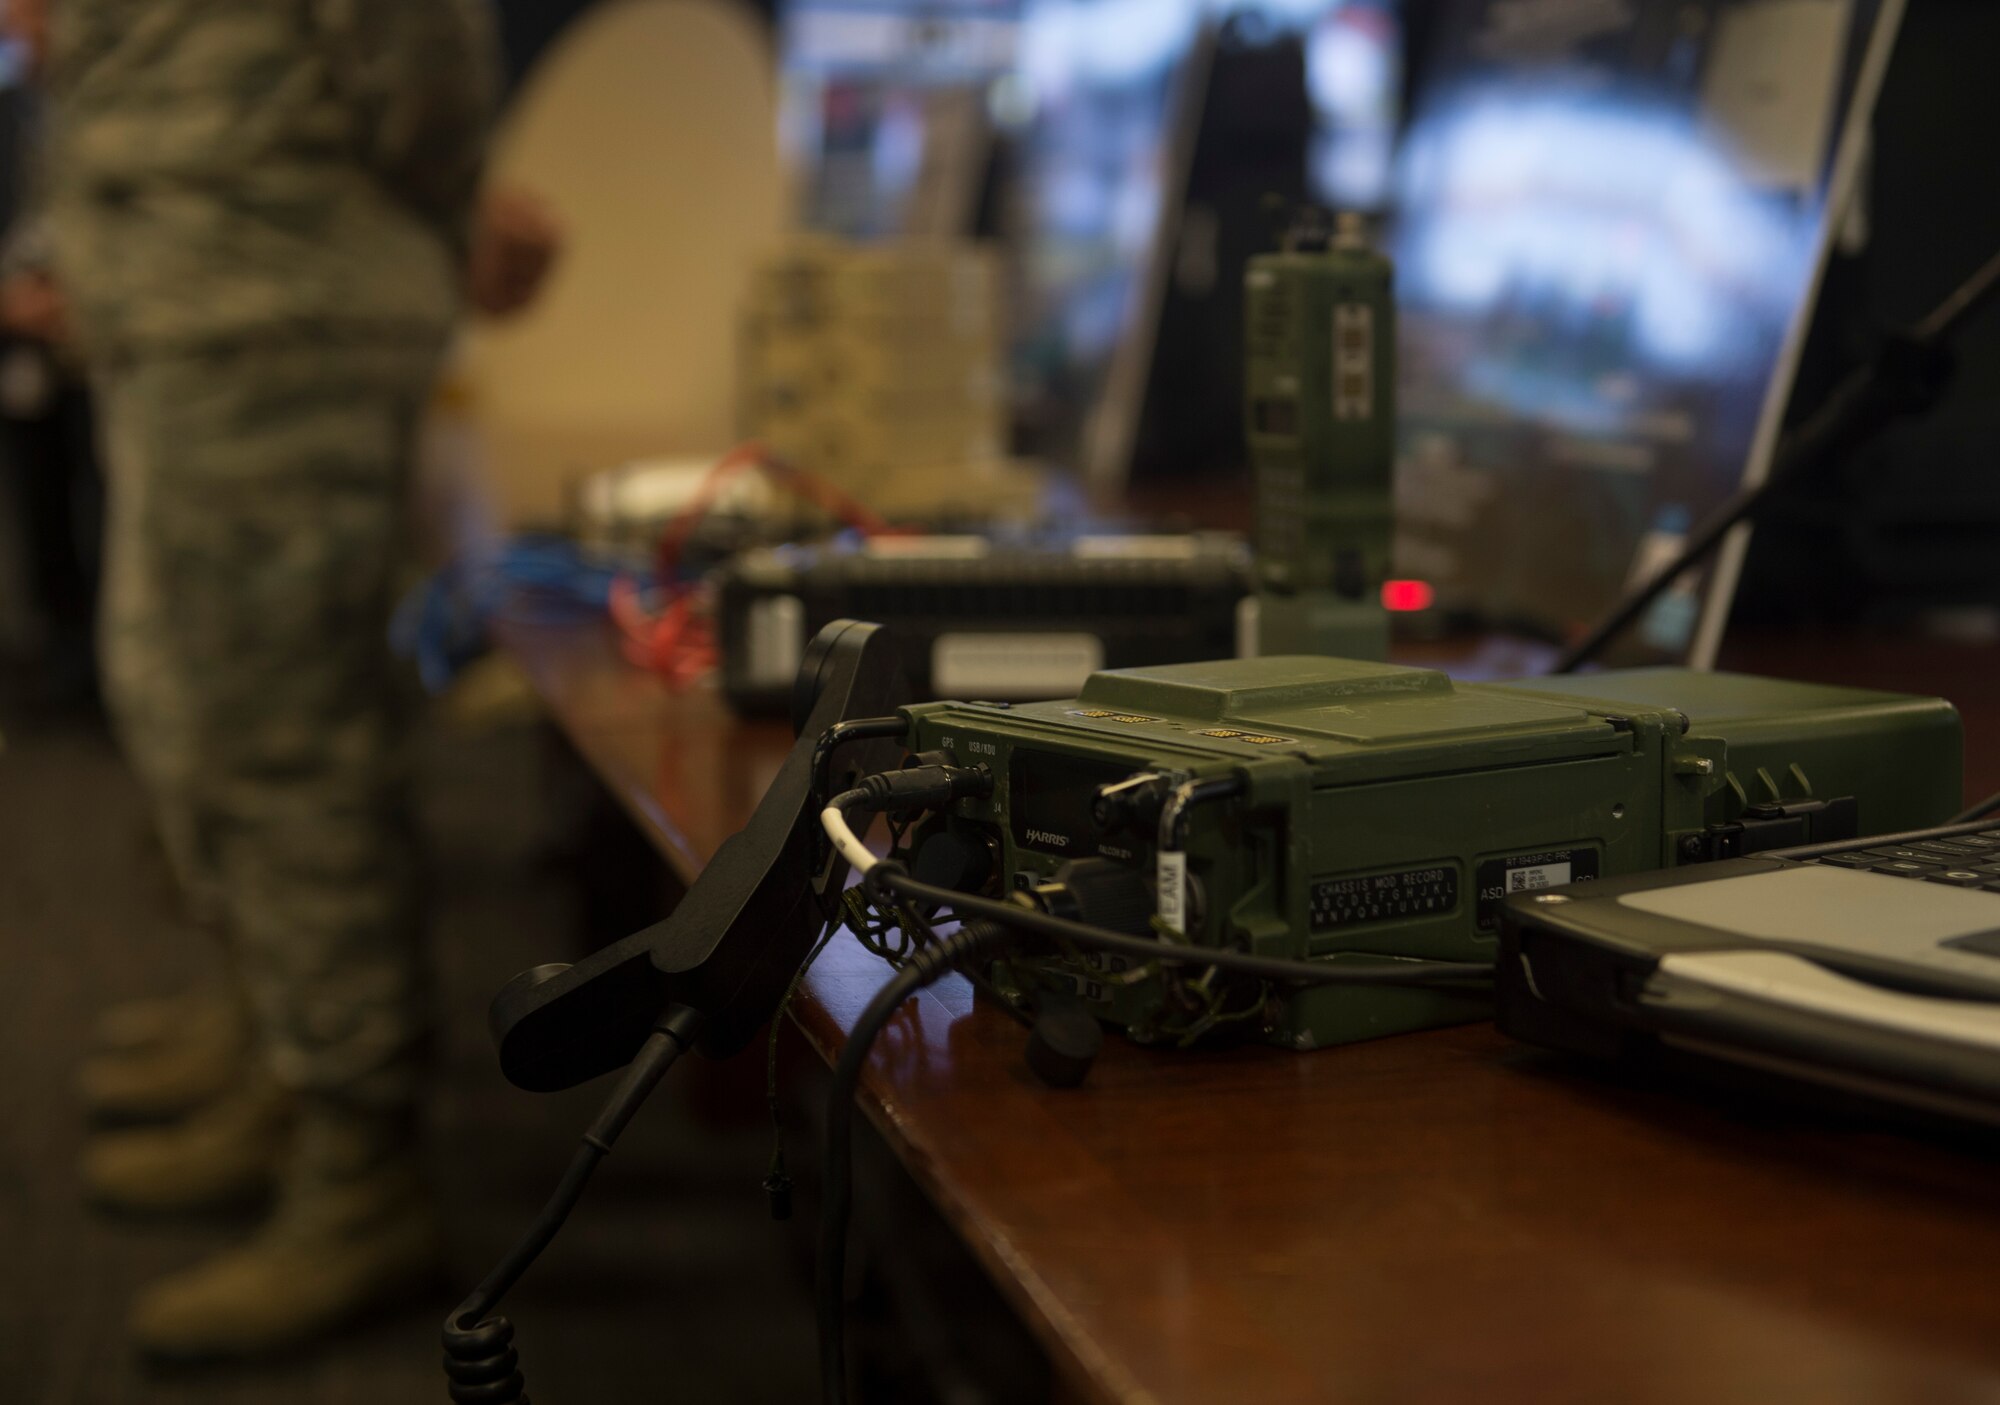 A PRC-117G tactical satellite communications radio is displayed during a civic leader tour at Joint Base San Antonio-Lackland, Texas, May 31, 2018. The radio is used to establish voice and data links in deployed or austere environments. The tour was hosted to introduce attendees to 24th Air Force's cyberspace mission and 25th AF's intelligence, surveillance and reconnaissance mission. (U.S. Air Force photo by Tech. Sgt. R.J. Biermann)